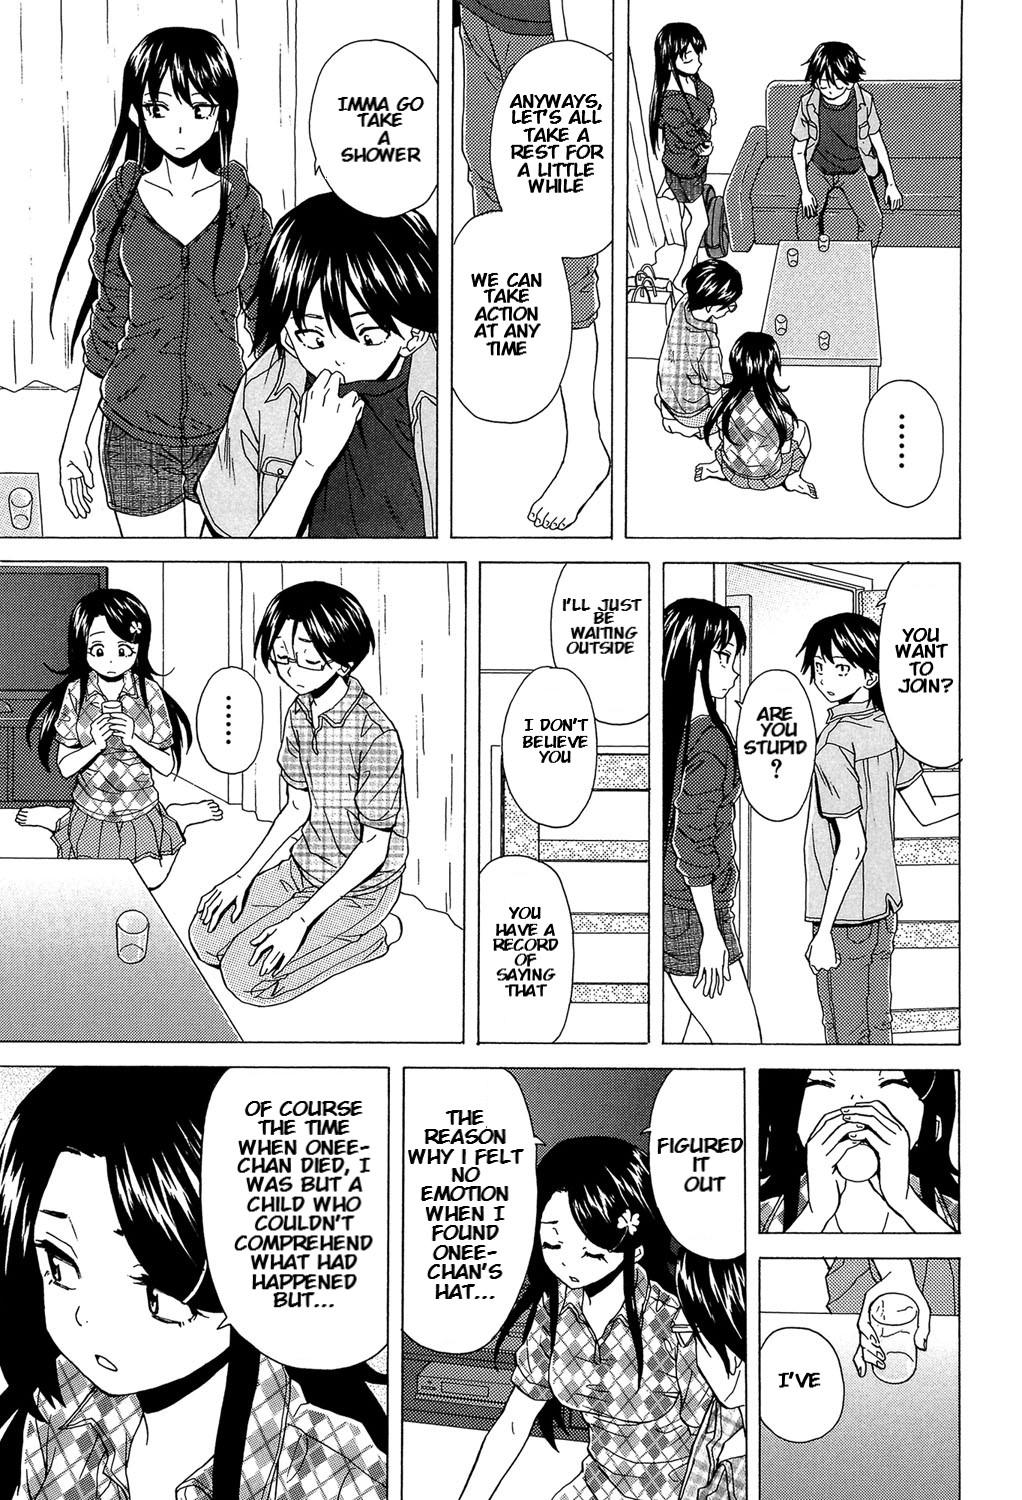 Hot Mom Sono Tobira no Mukougawa - behind the door Ch. 5 Casting - Page 5